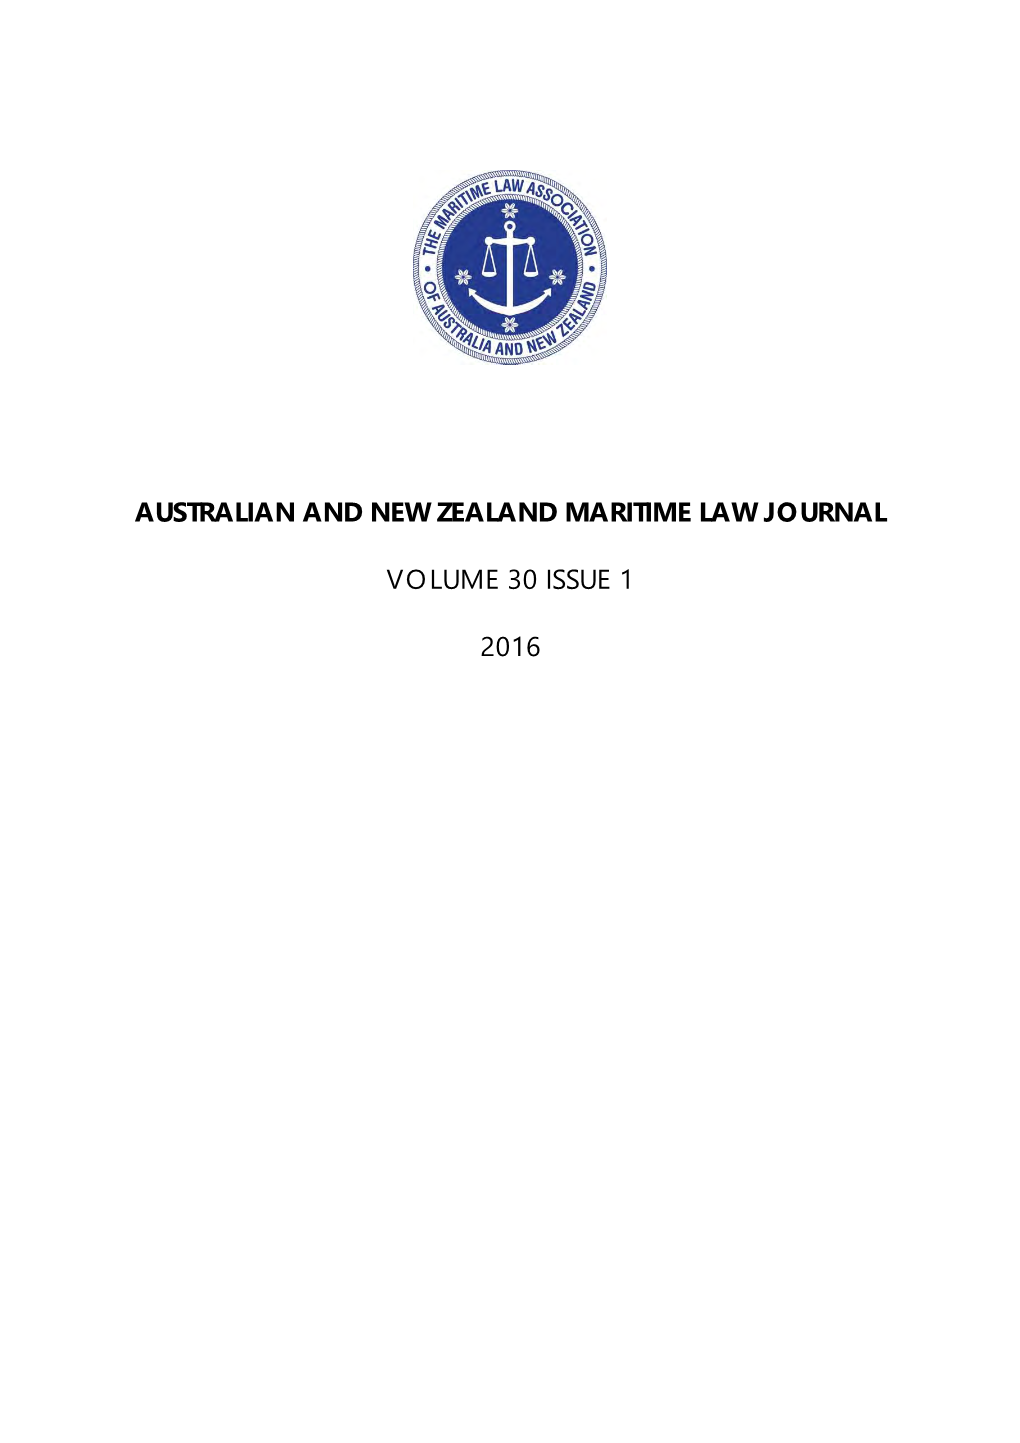 Australian and New Zealand Maritime Law Journal Volume 30 Issue 1 2016